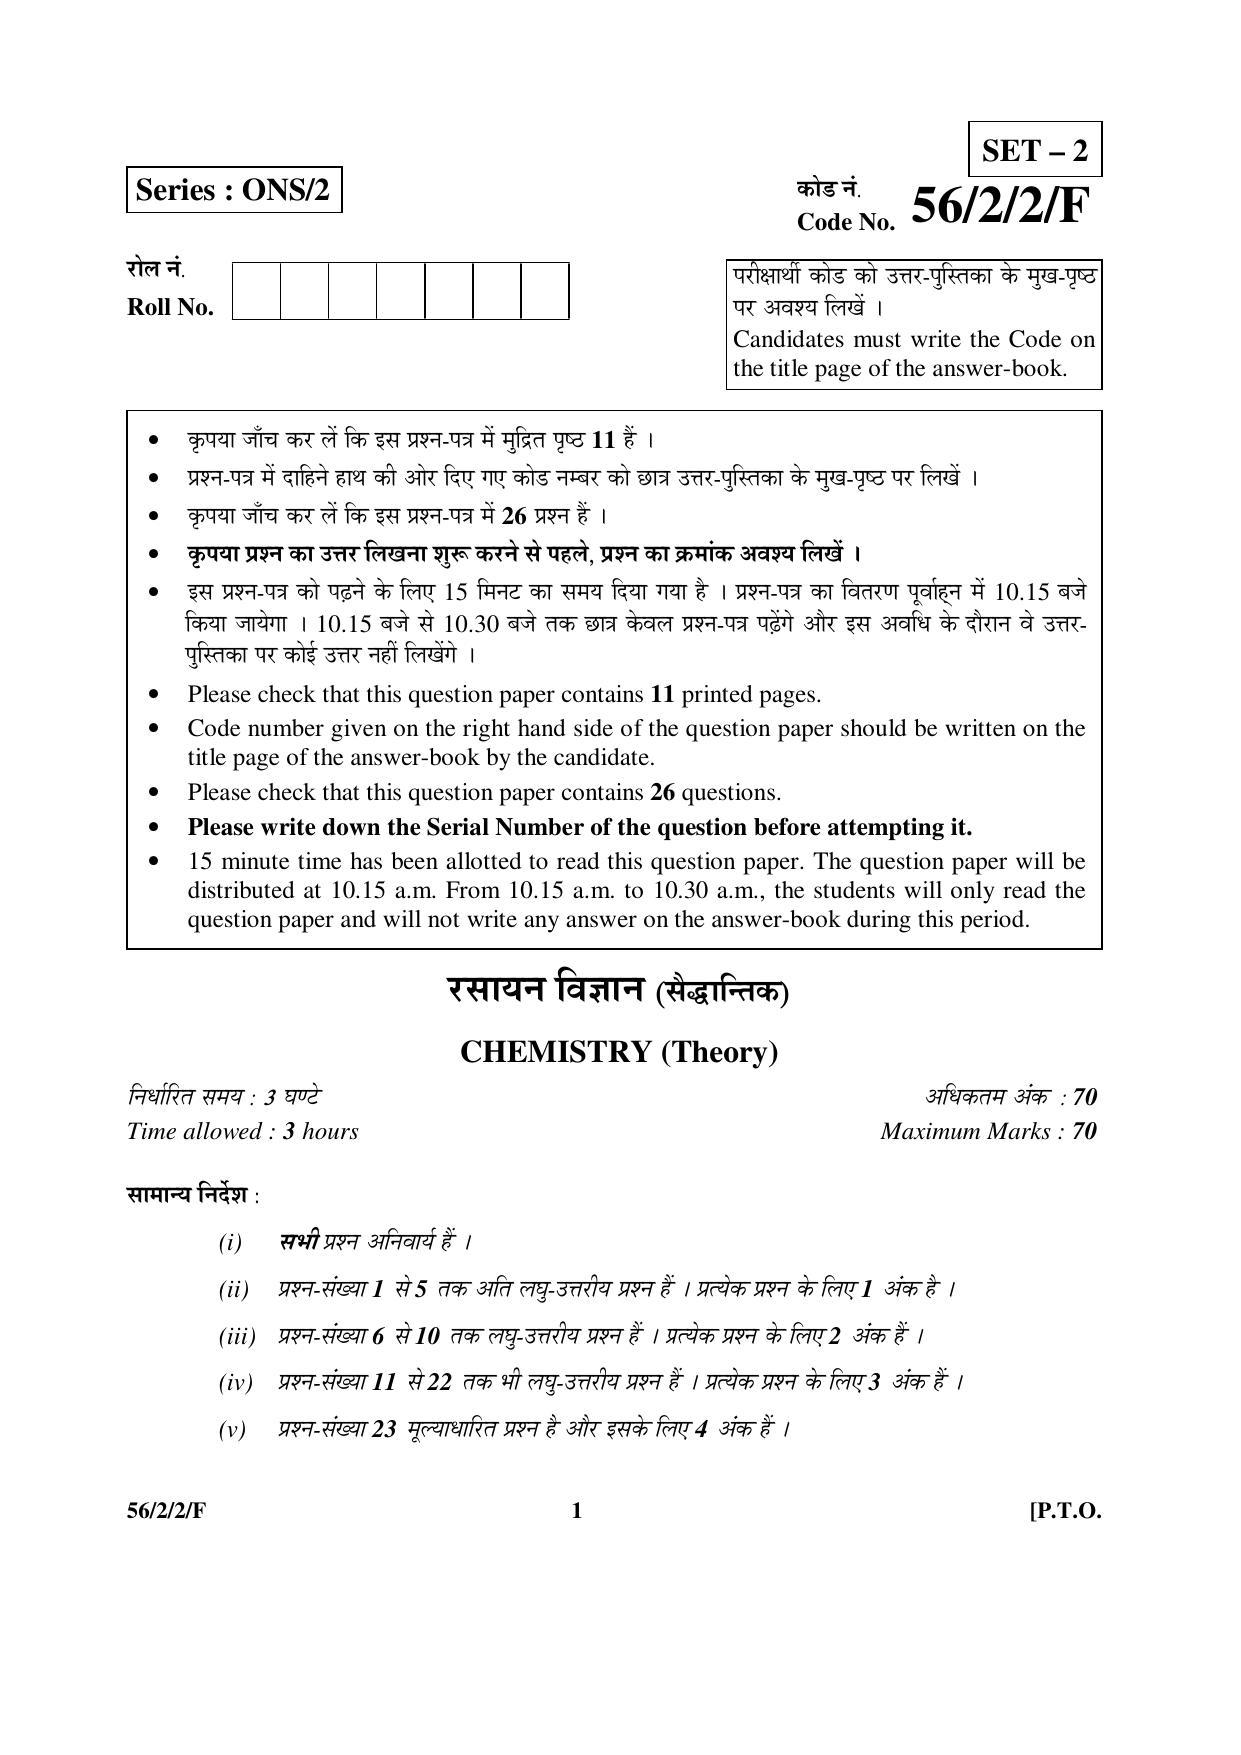 CBSE Class 12 56-2-2-F _Chemistry_ 2016 Question Paper - Page 1